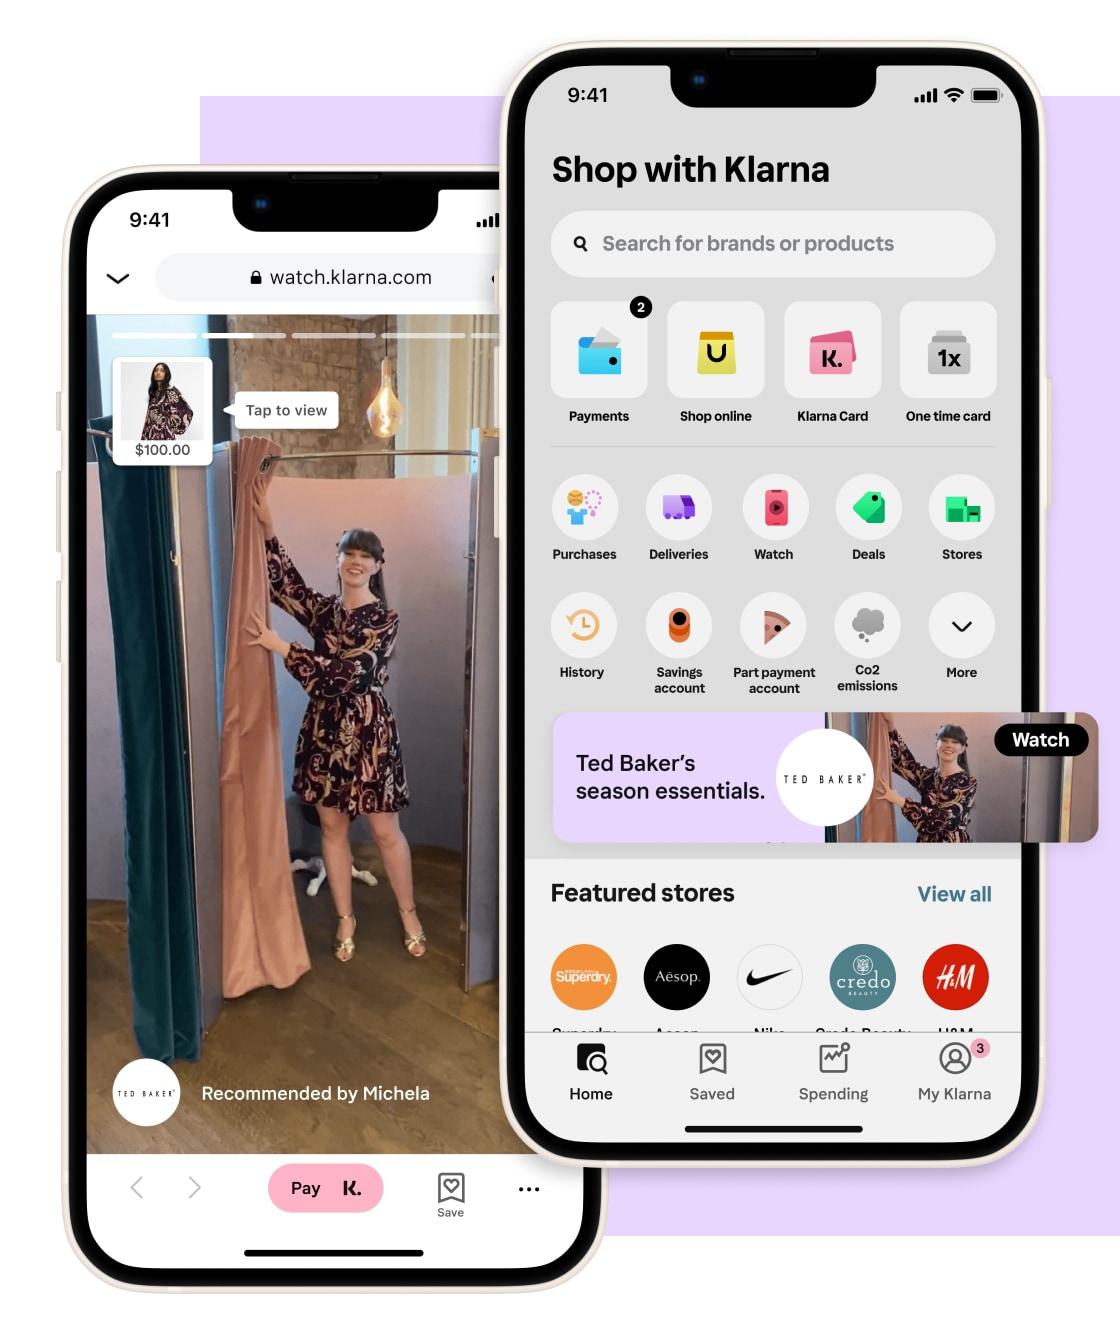 Shoppable content wherever your customers are